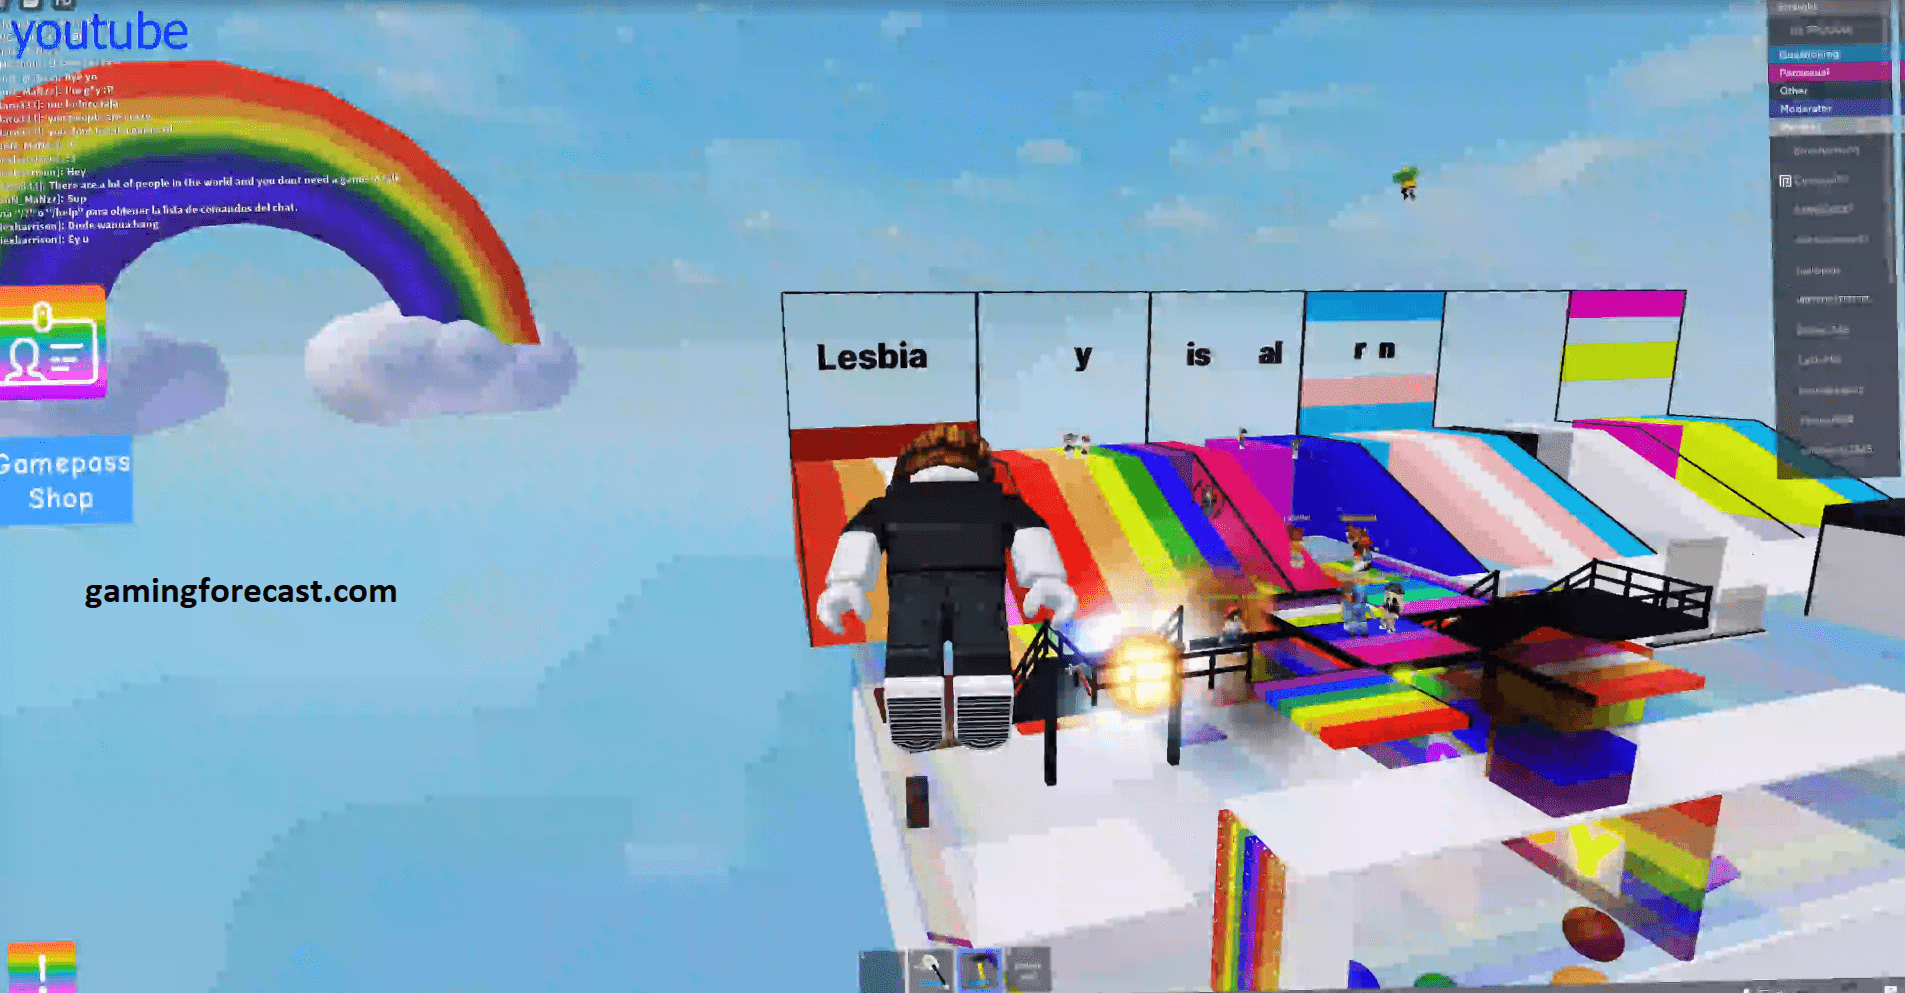 Roblox Hack Download Pc Destroy Lobby Fly Aimbot Scripts 2021 Gaming Forecast Download Free Online Game Hacks - roblox auto aim